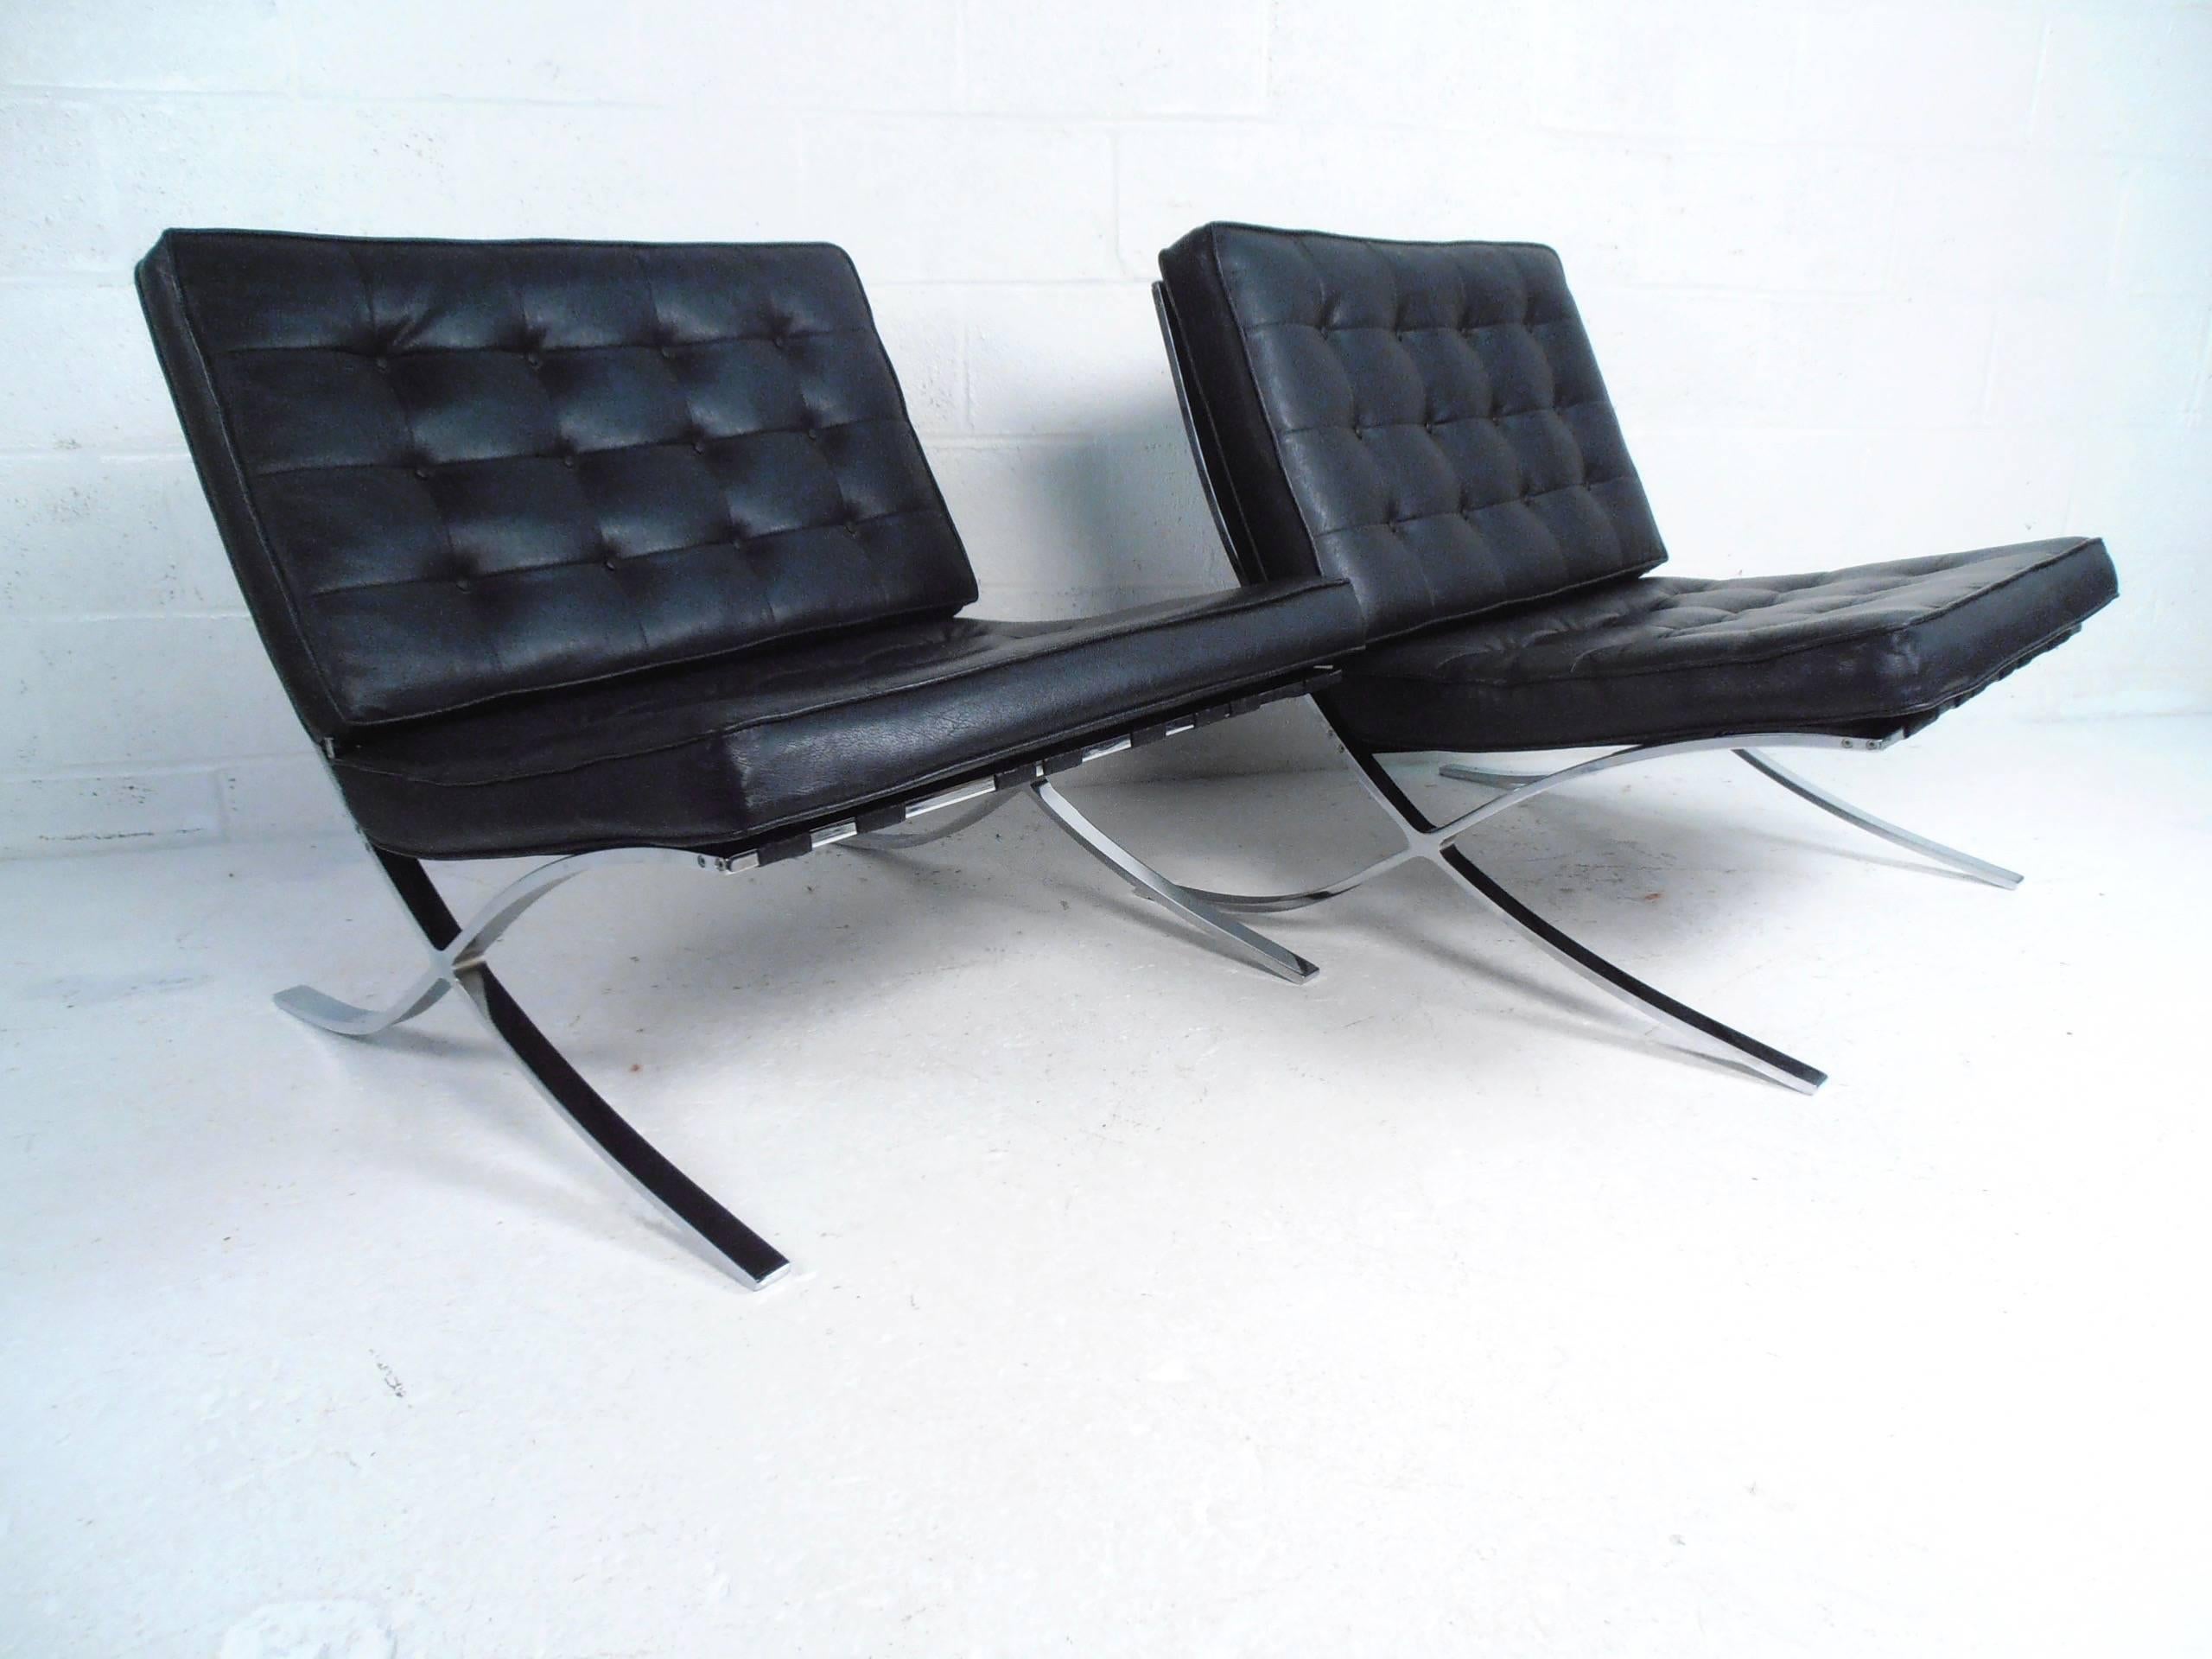 This pair of vintage modern lounge chairs feature stylish chrome frames and tufted vinyl upholstery. The stylish Mid-Century design of the pair are in the style of Mies van der Rohe and make a lovely addition to any interior. Please confirm item